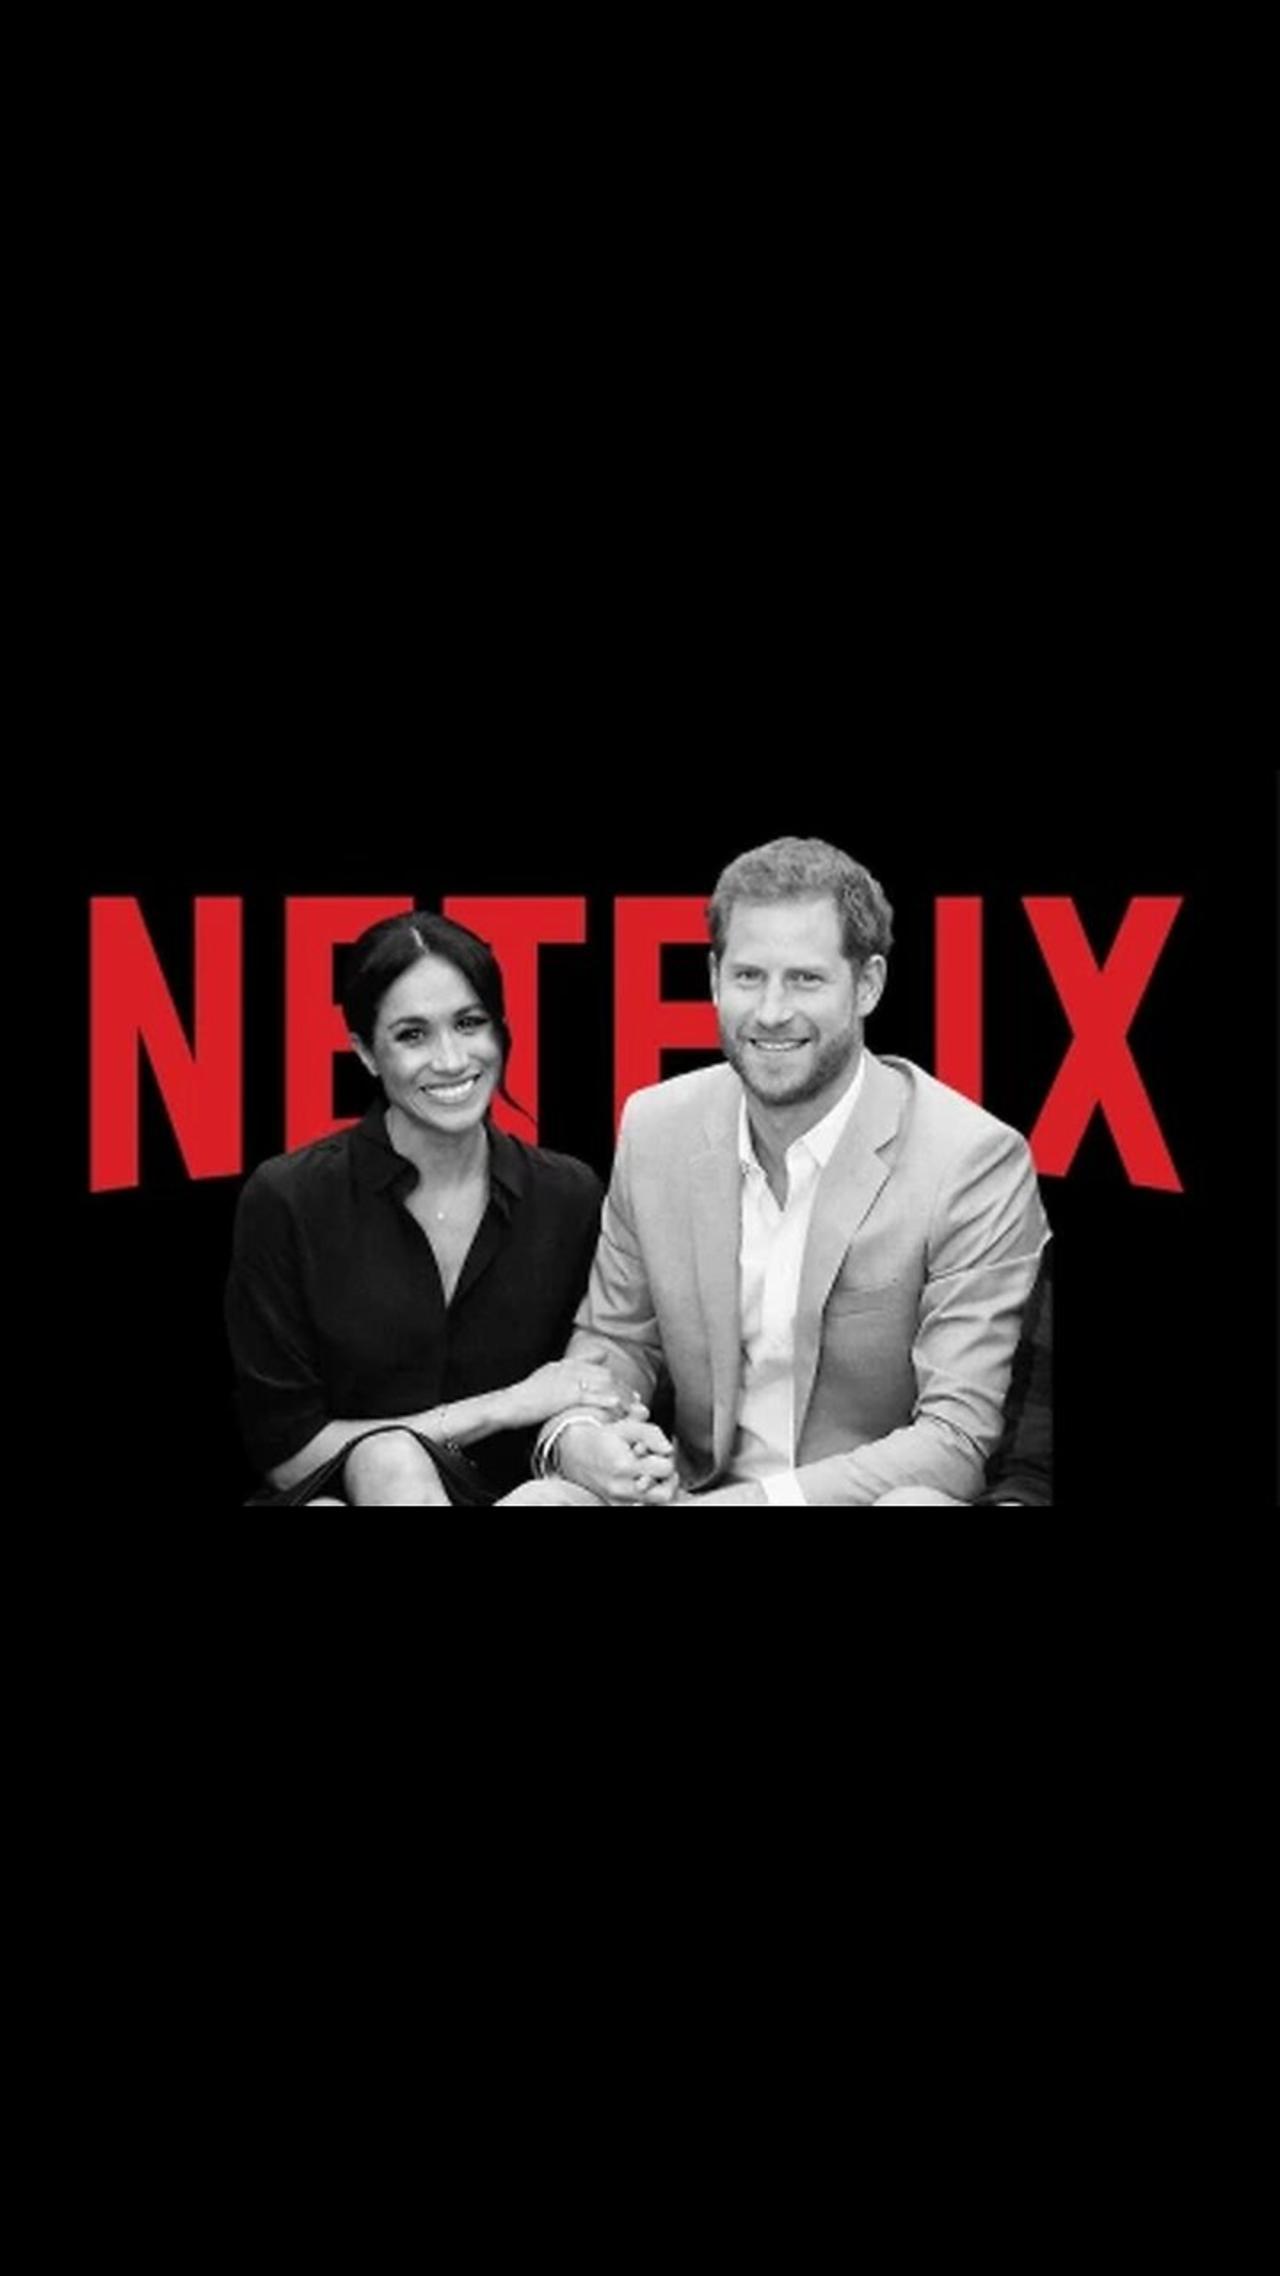 Harry and Meghan's documentary becomes most watched show on Netflix in US and UK